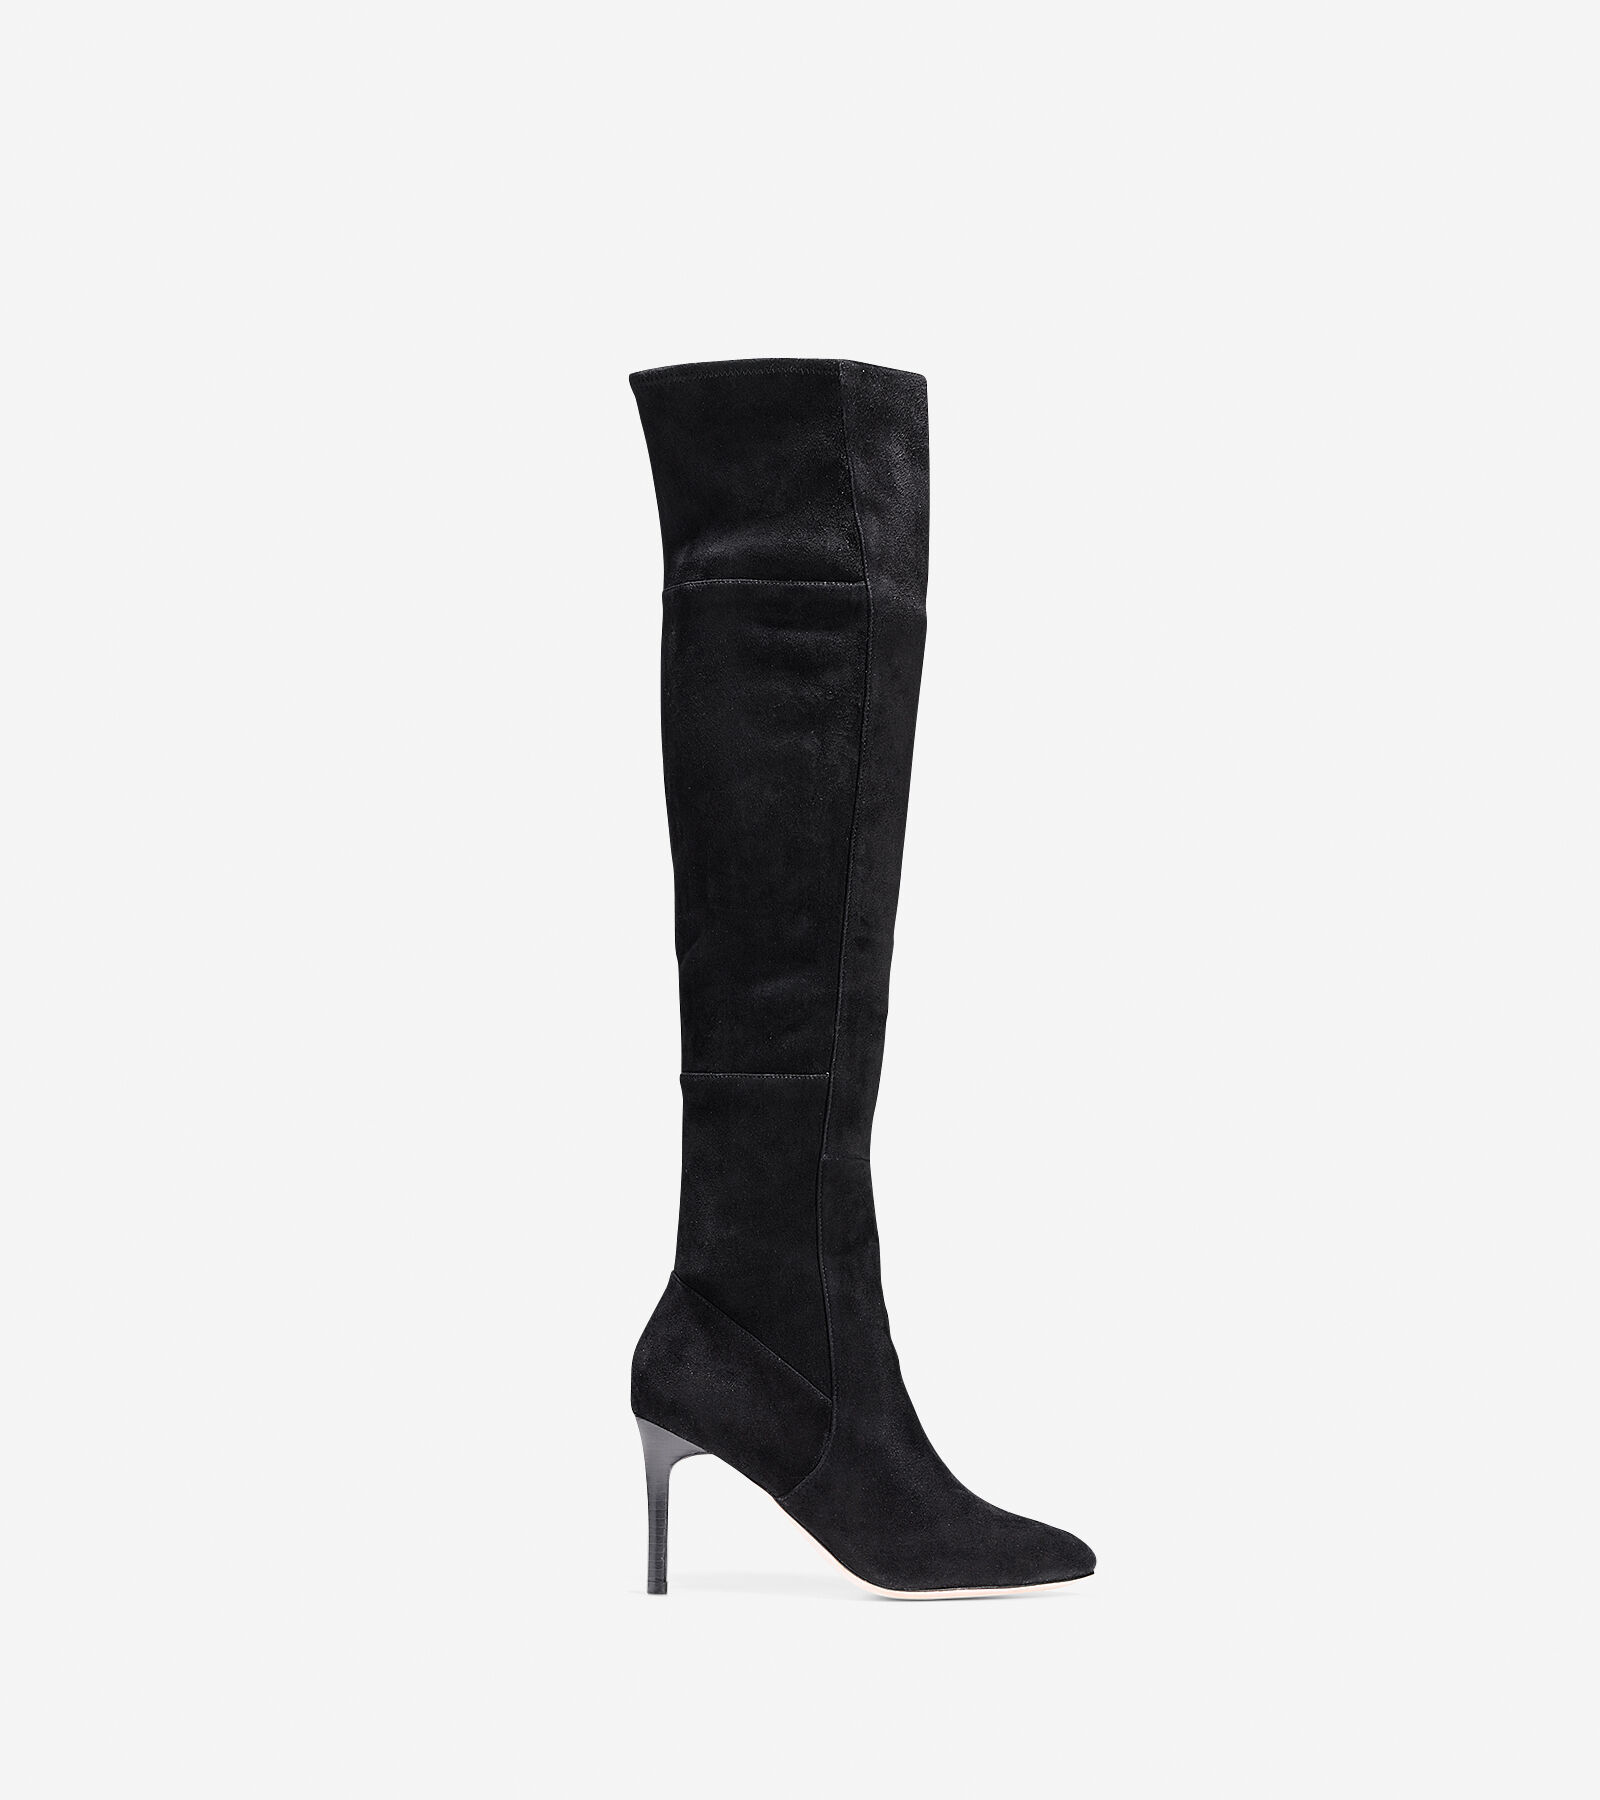 Suede Over The Knee High Heel Boots NlYPBSmg